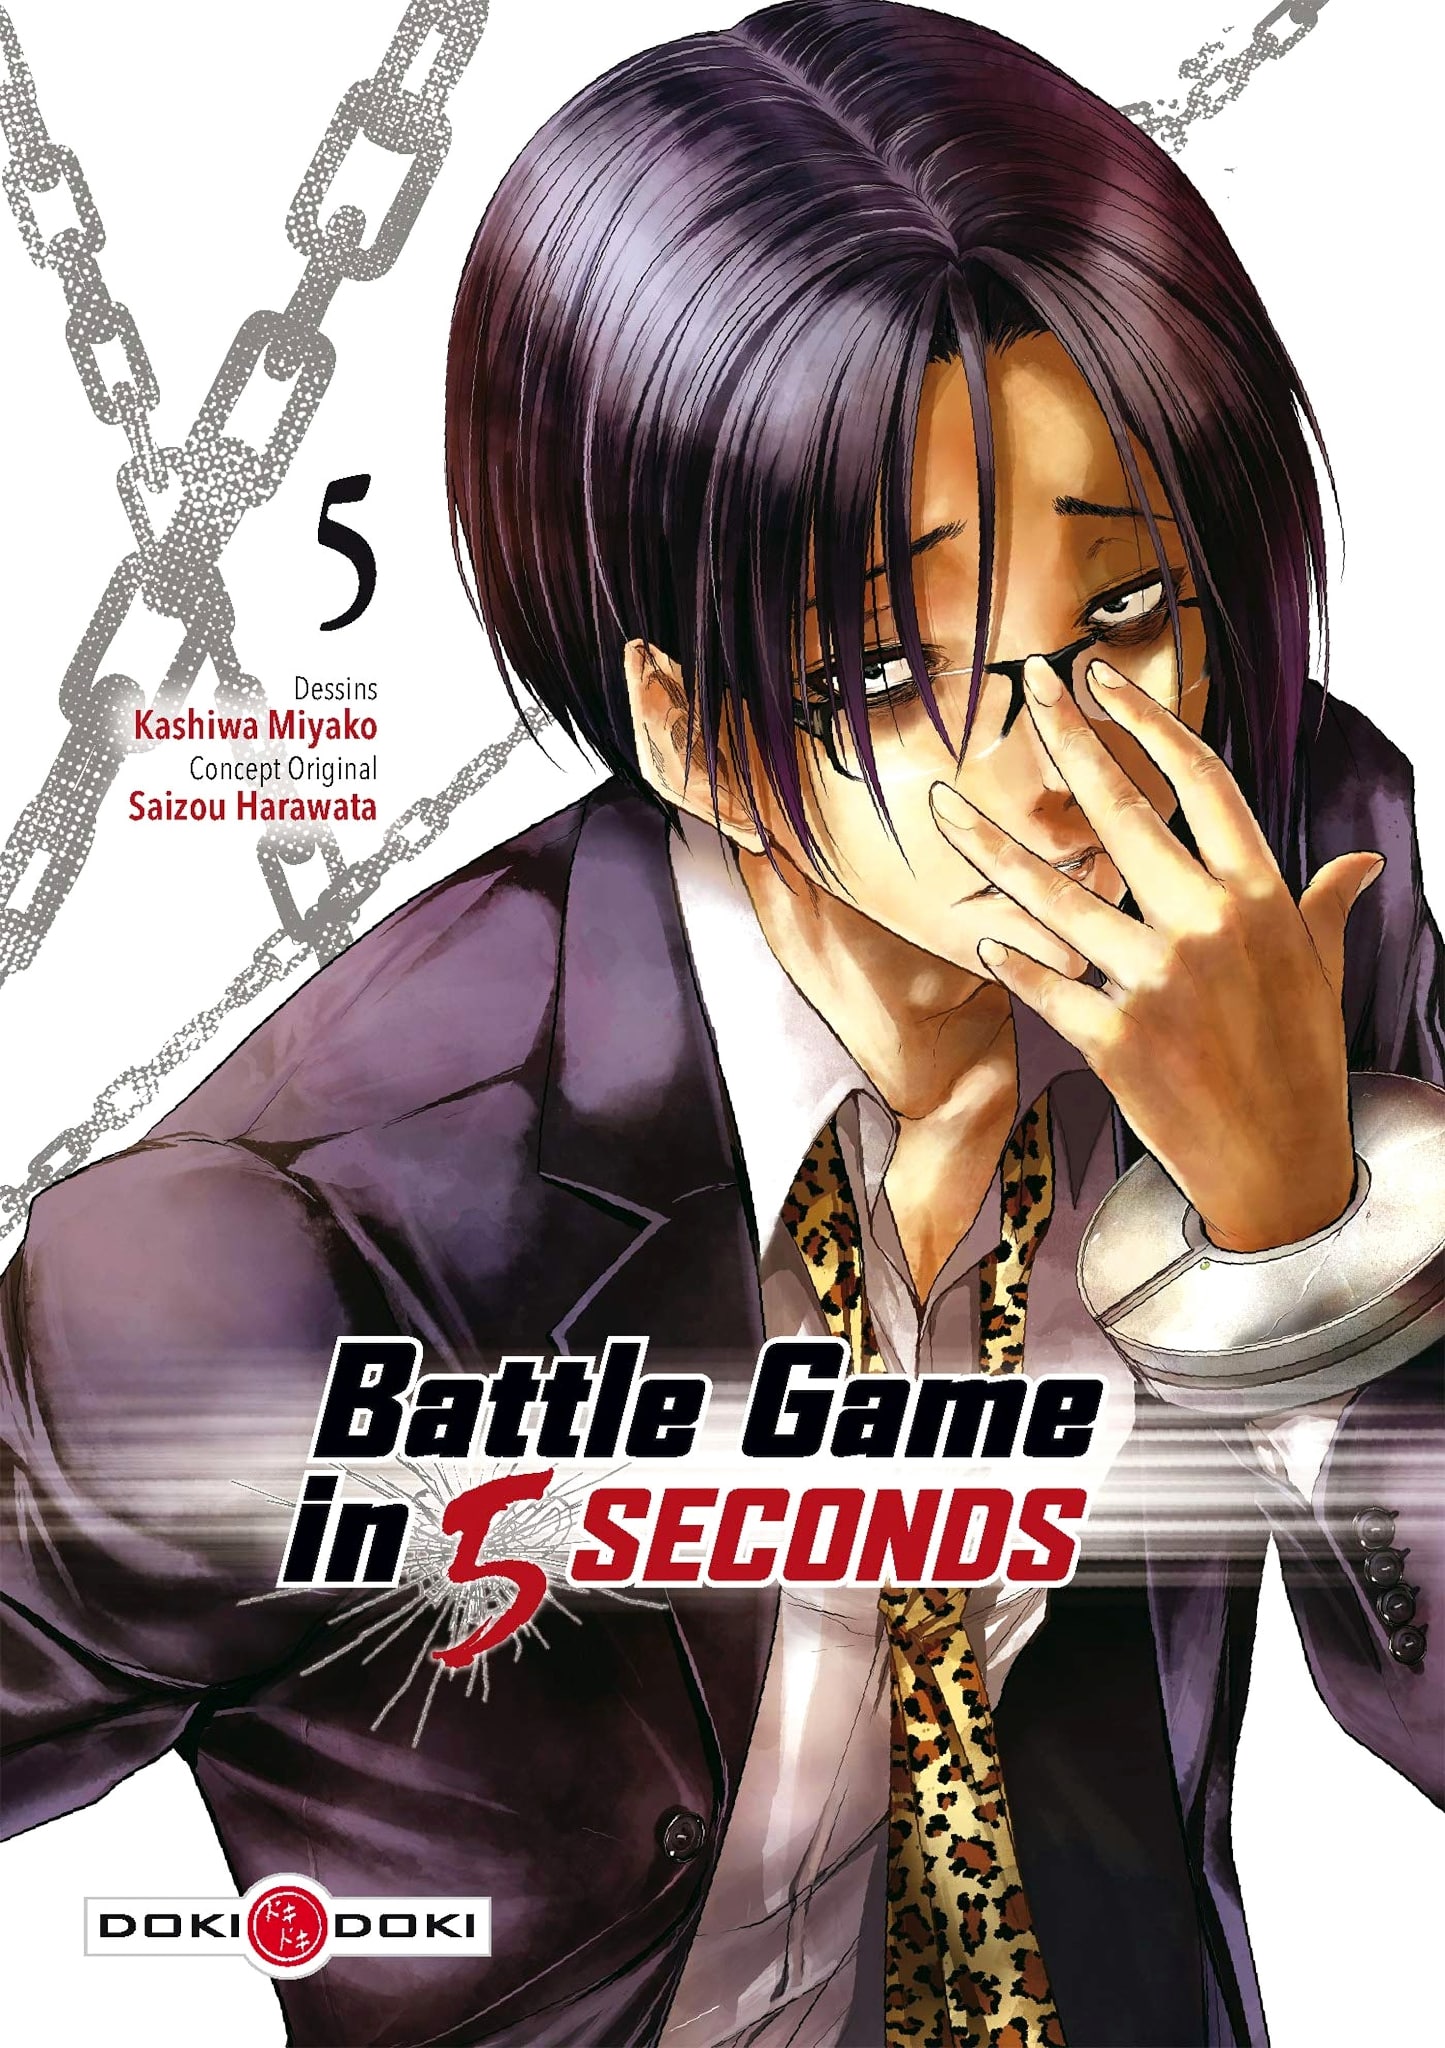 Tome 5 du manga Battle Game in 5 Seconds